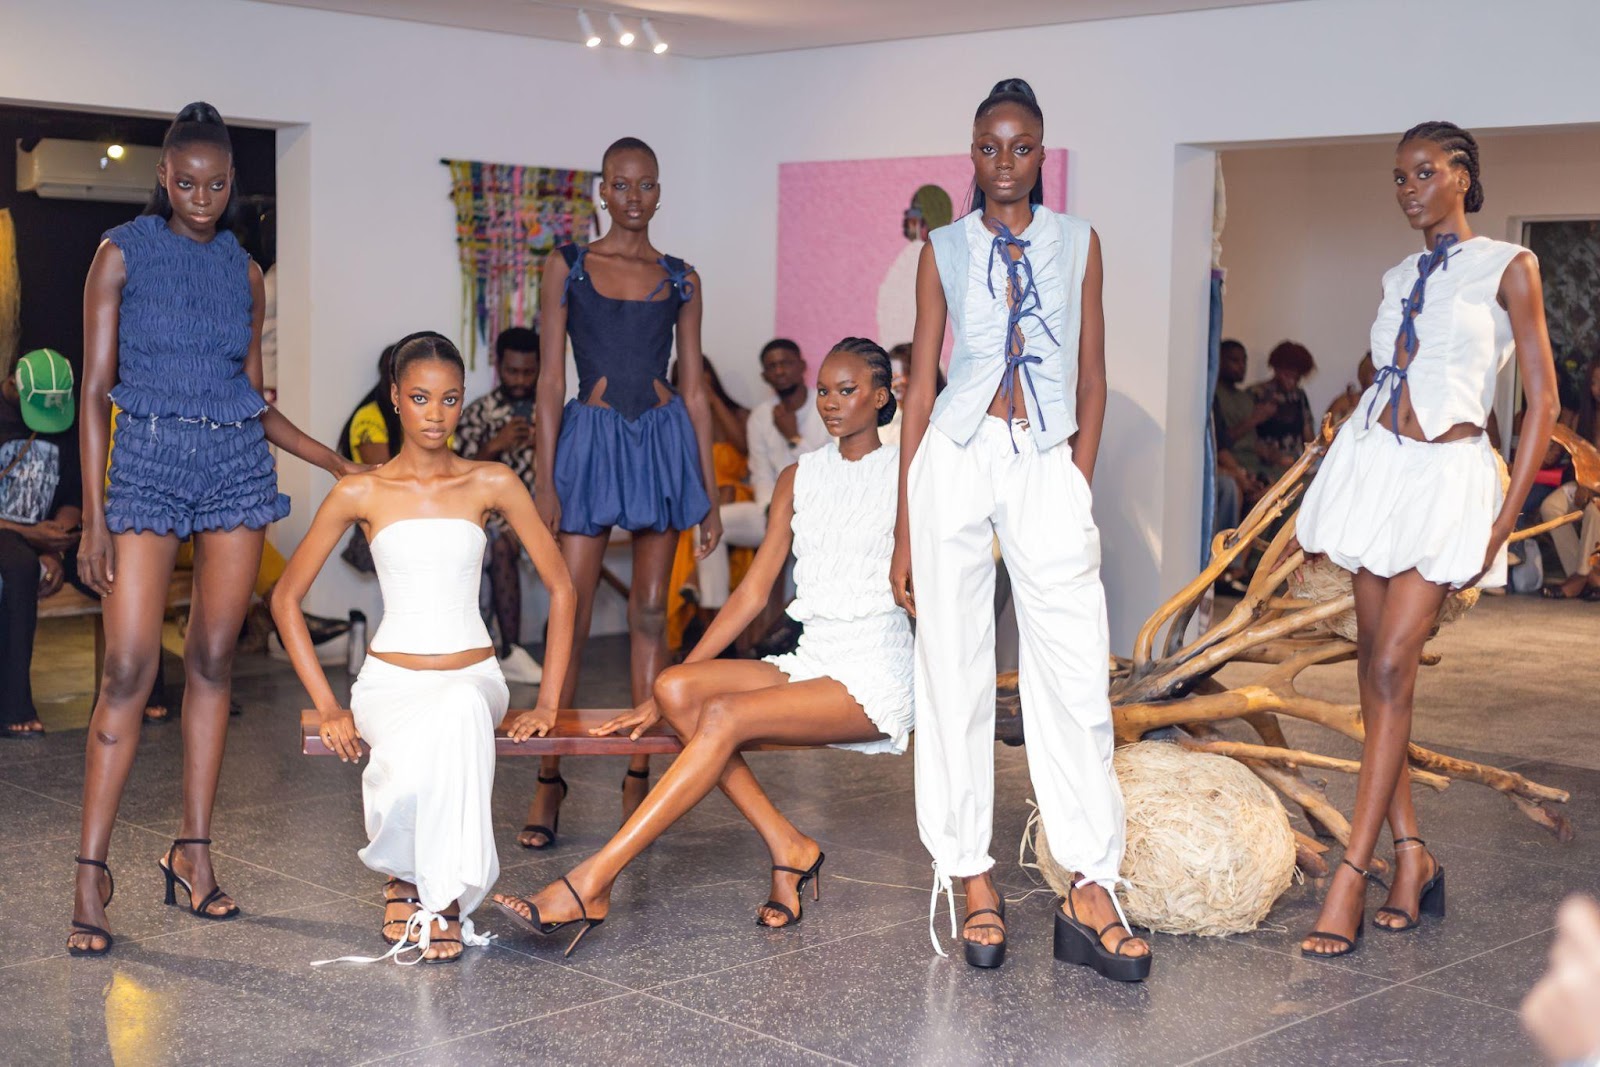 LFW24 Woven Threads: Exploring the Power of Community in Fashion